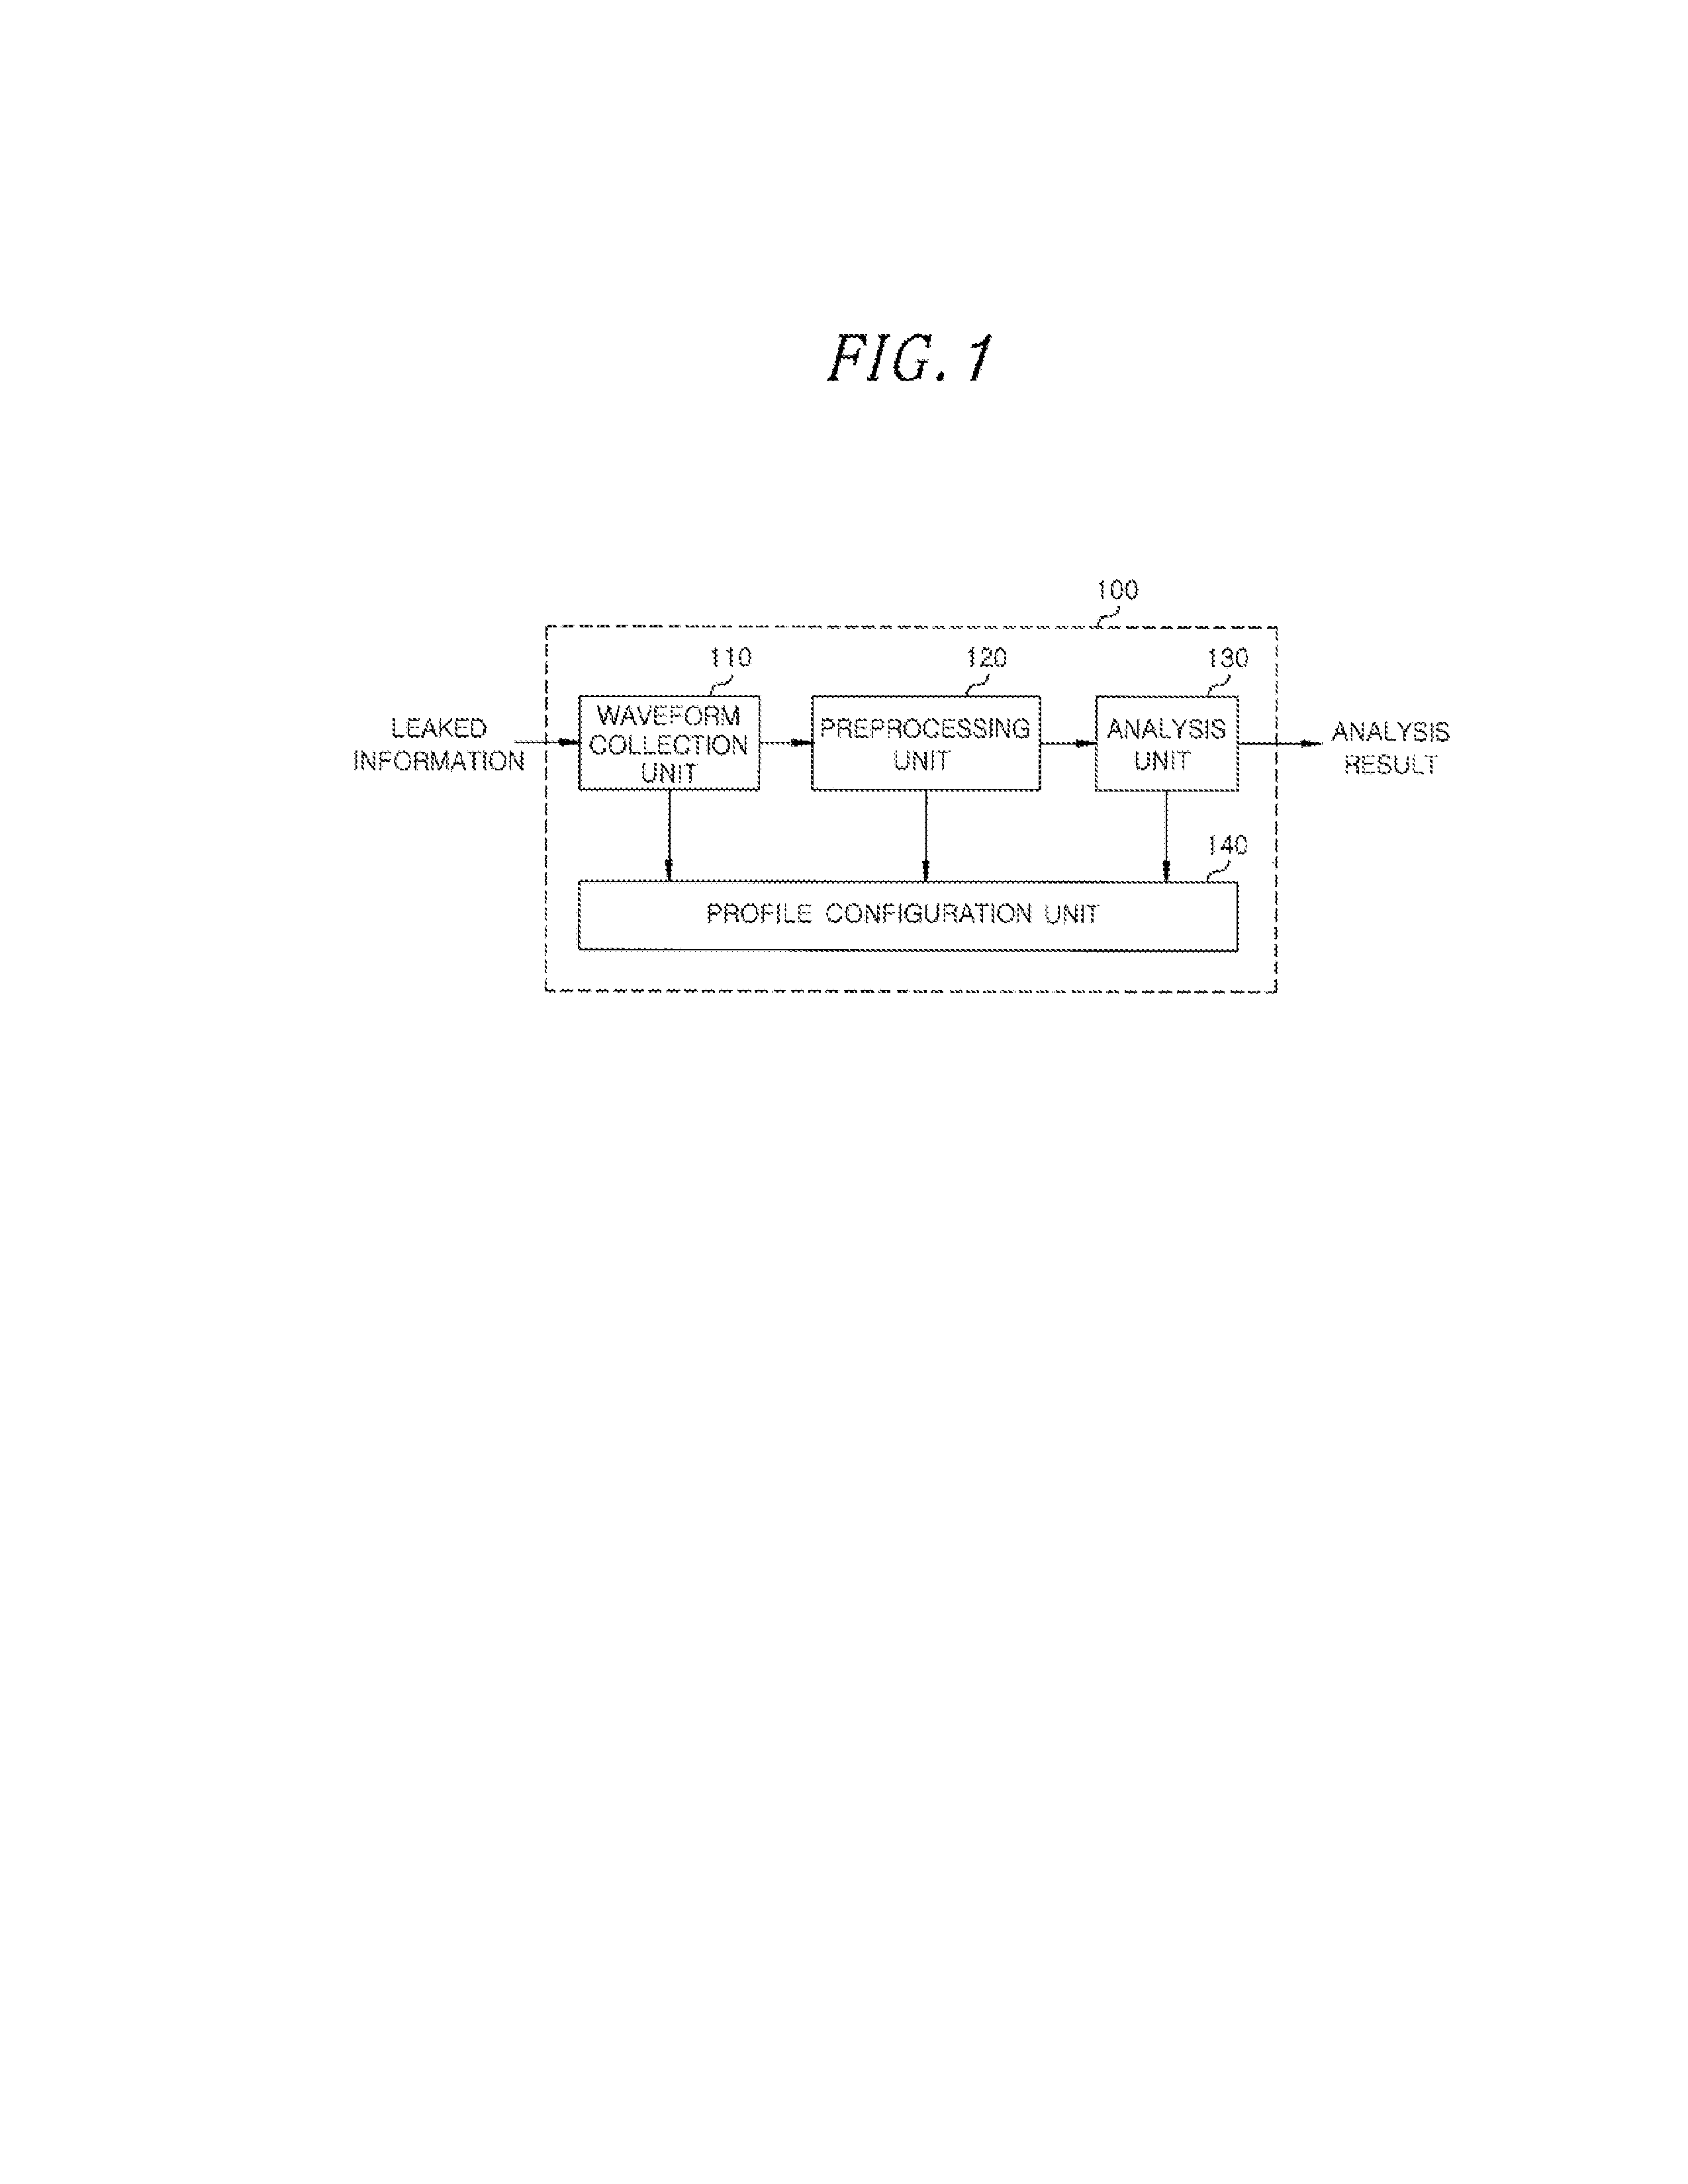 Side-channel analysis apparatus and method based on profile